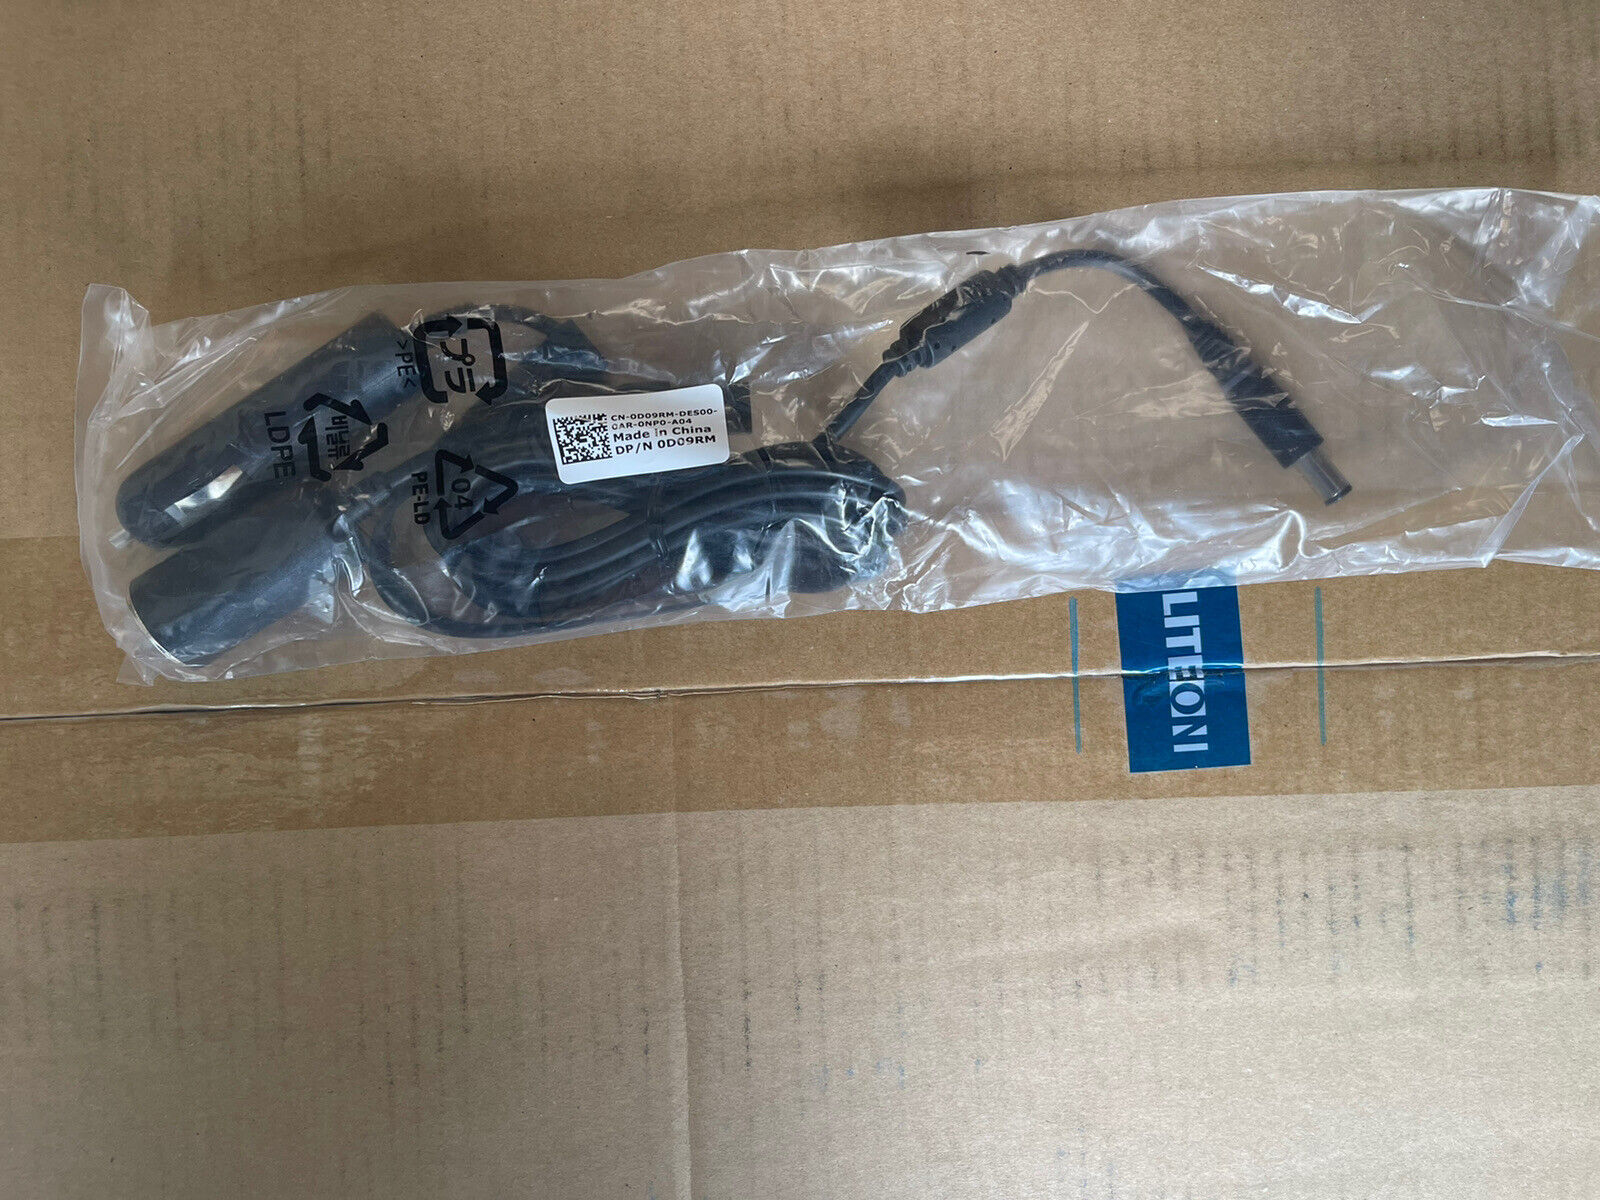 OEM ORIGINAL Dell Auto Car AirPlane 90W Laptop Charger Power Adapter 0D09RM